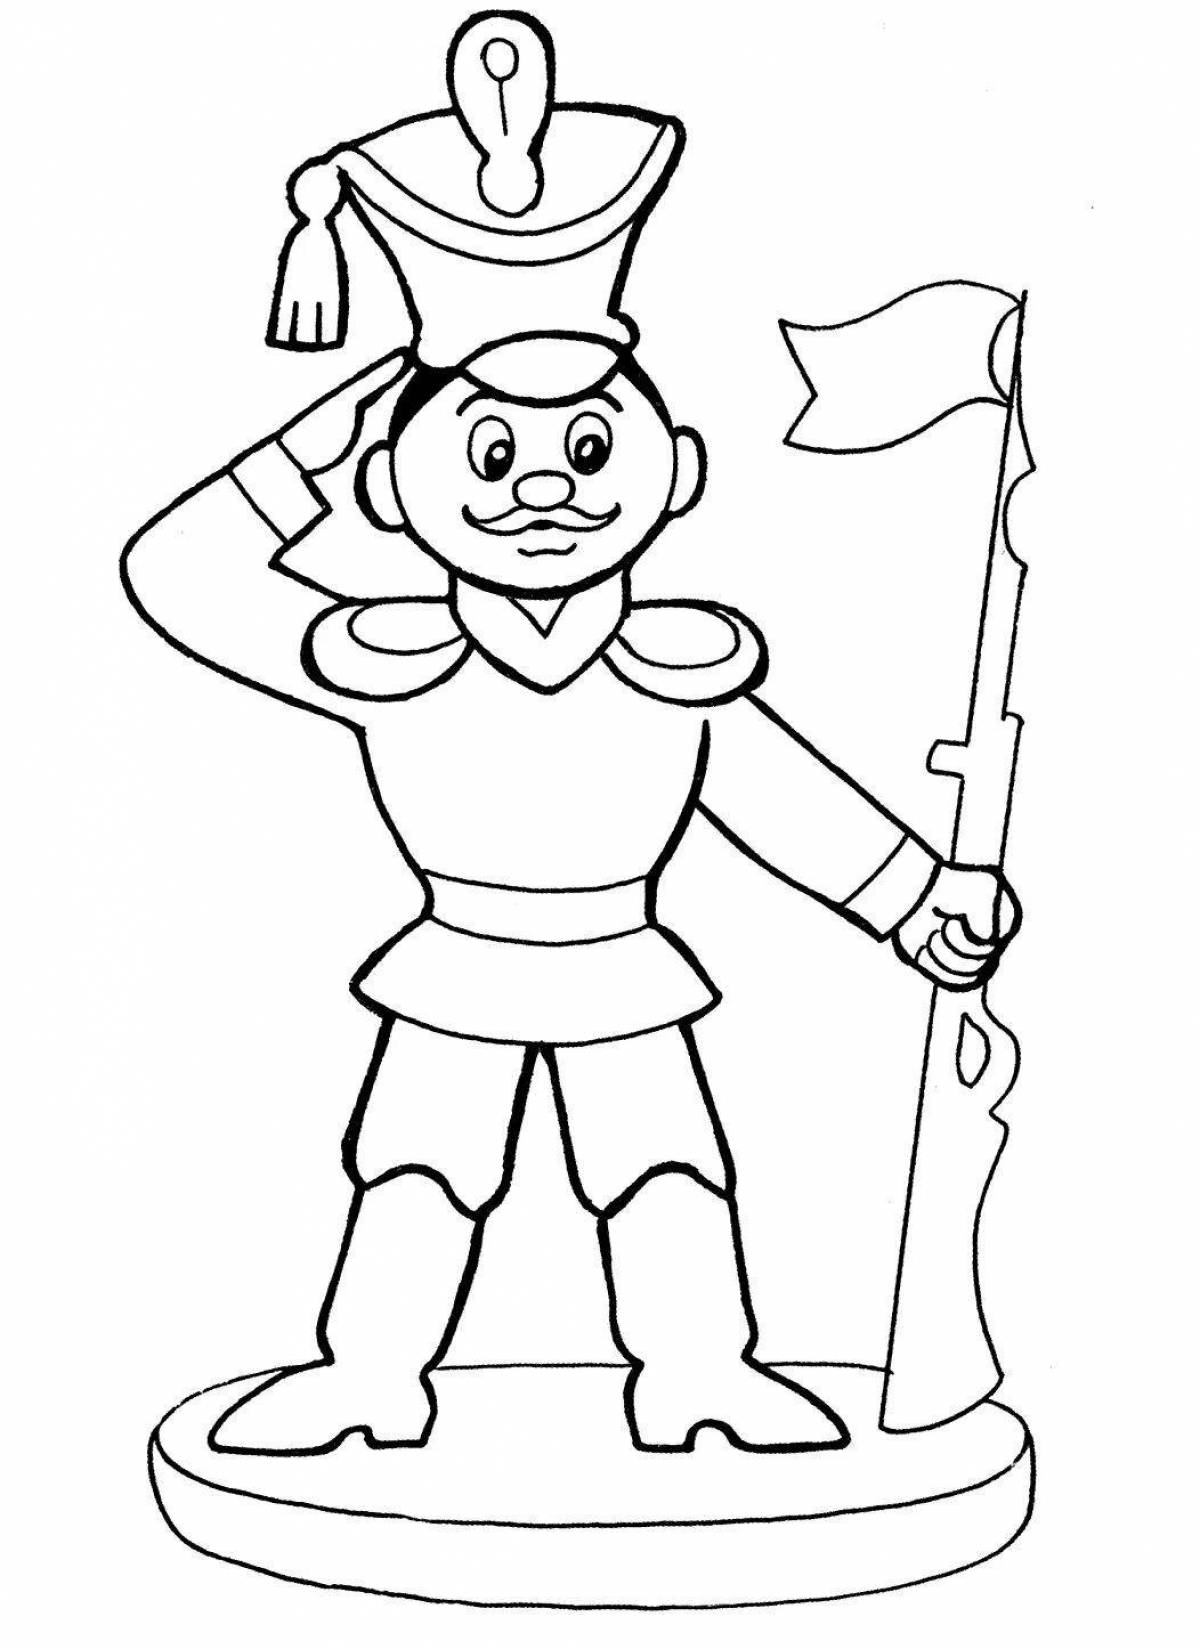 Coloring merry tin soldier